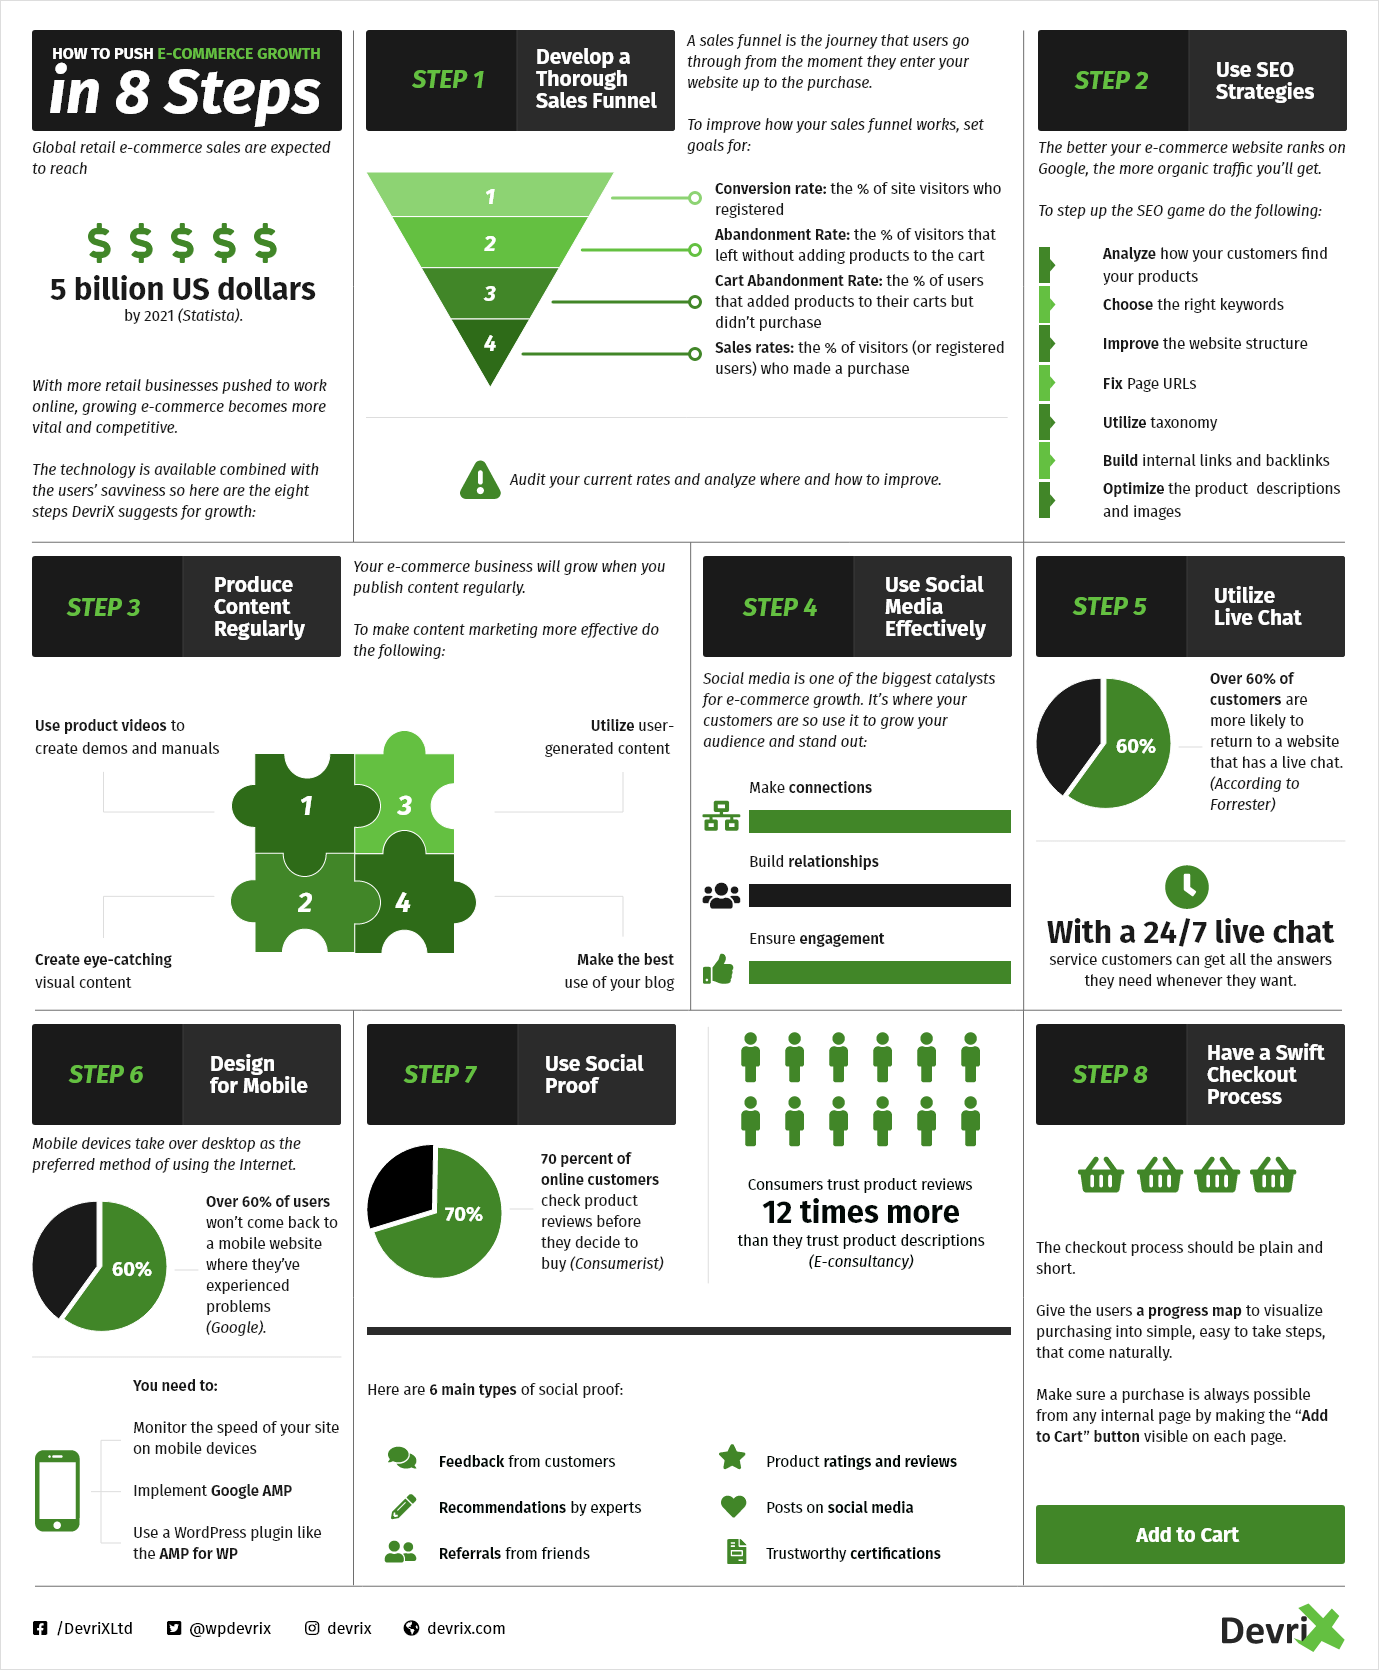 Infographic for "How to push e-commerce growth in 8 steps"